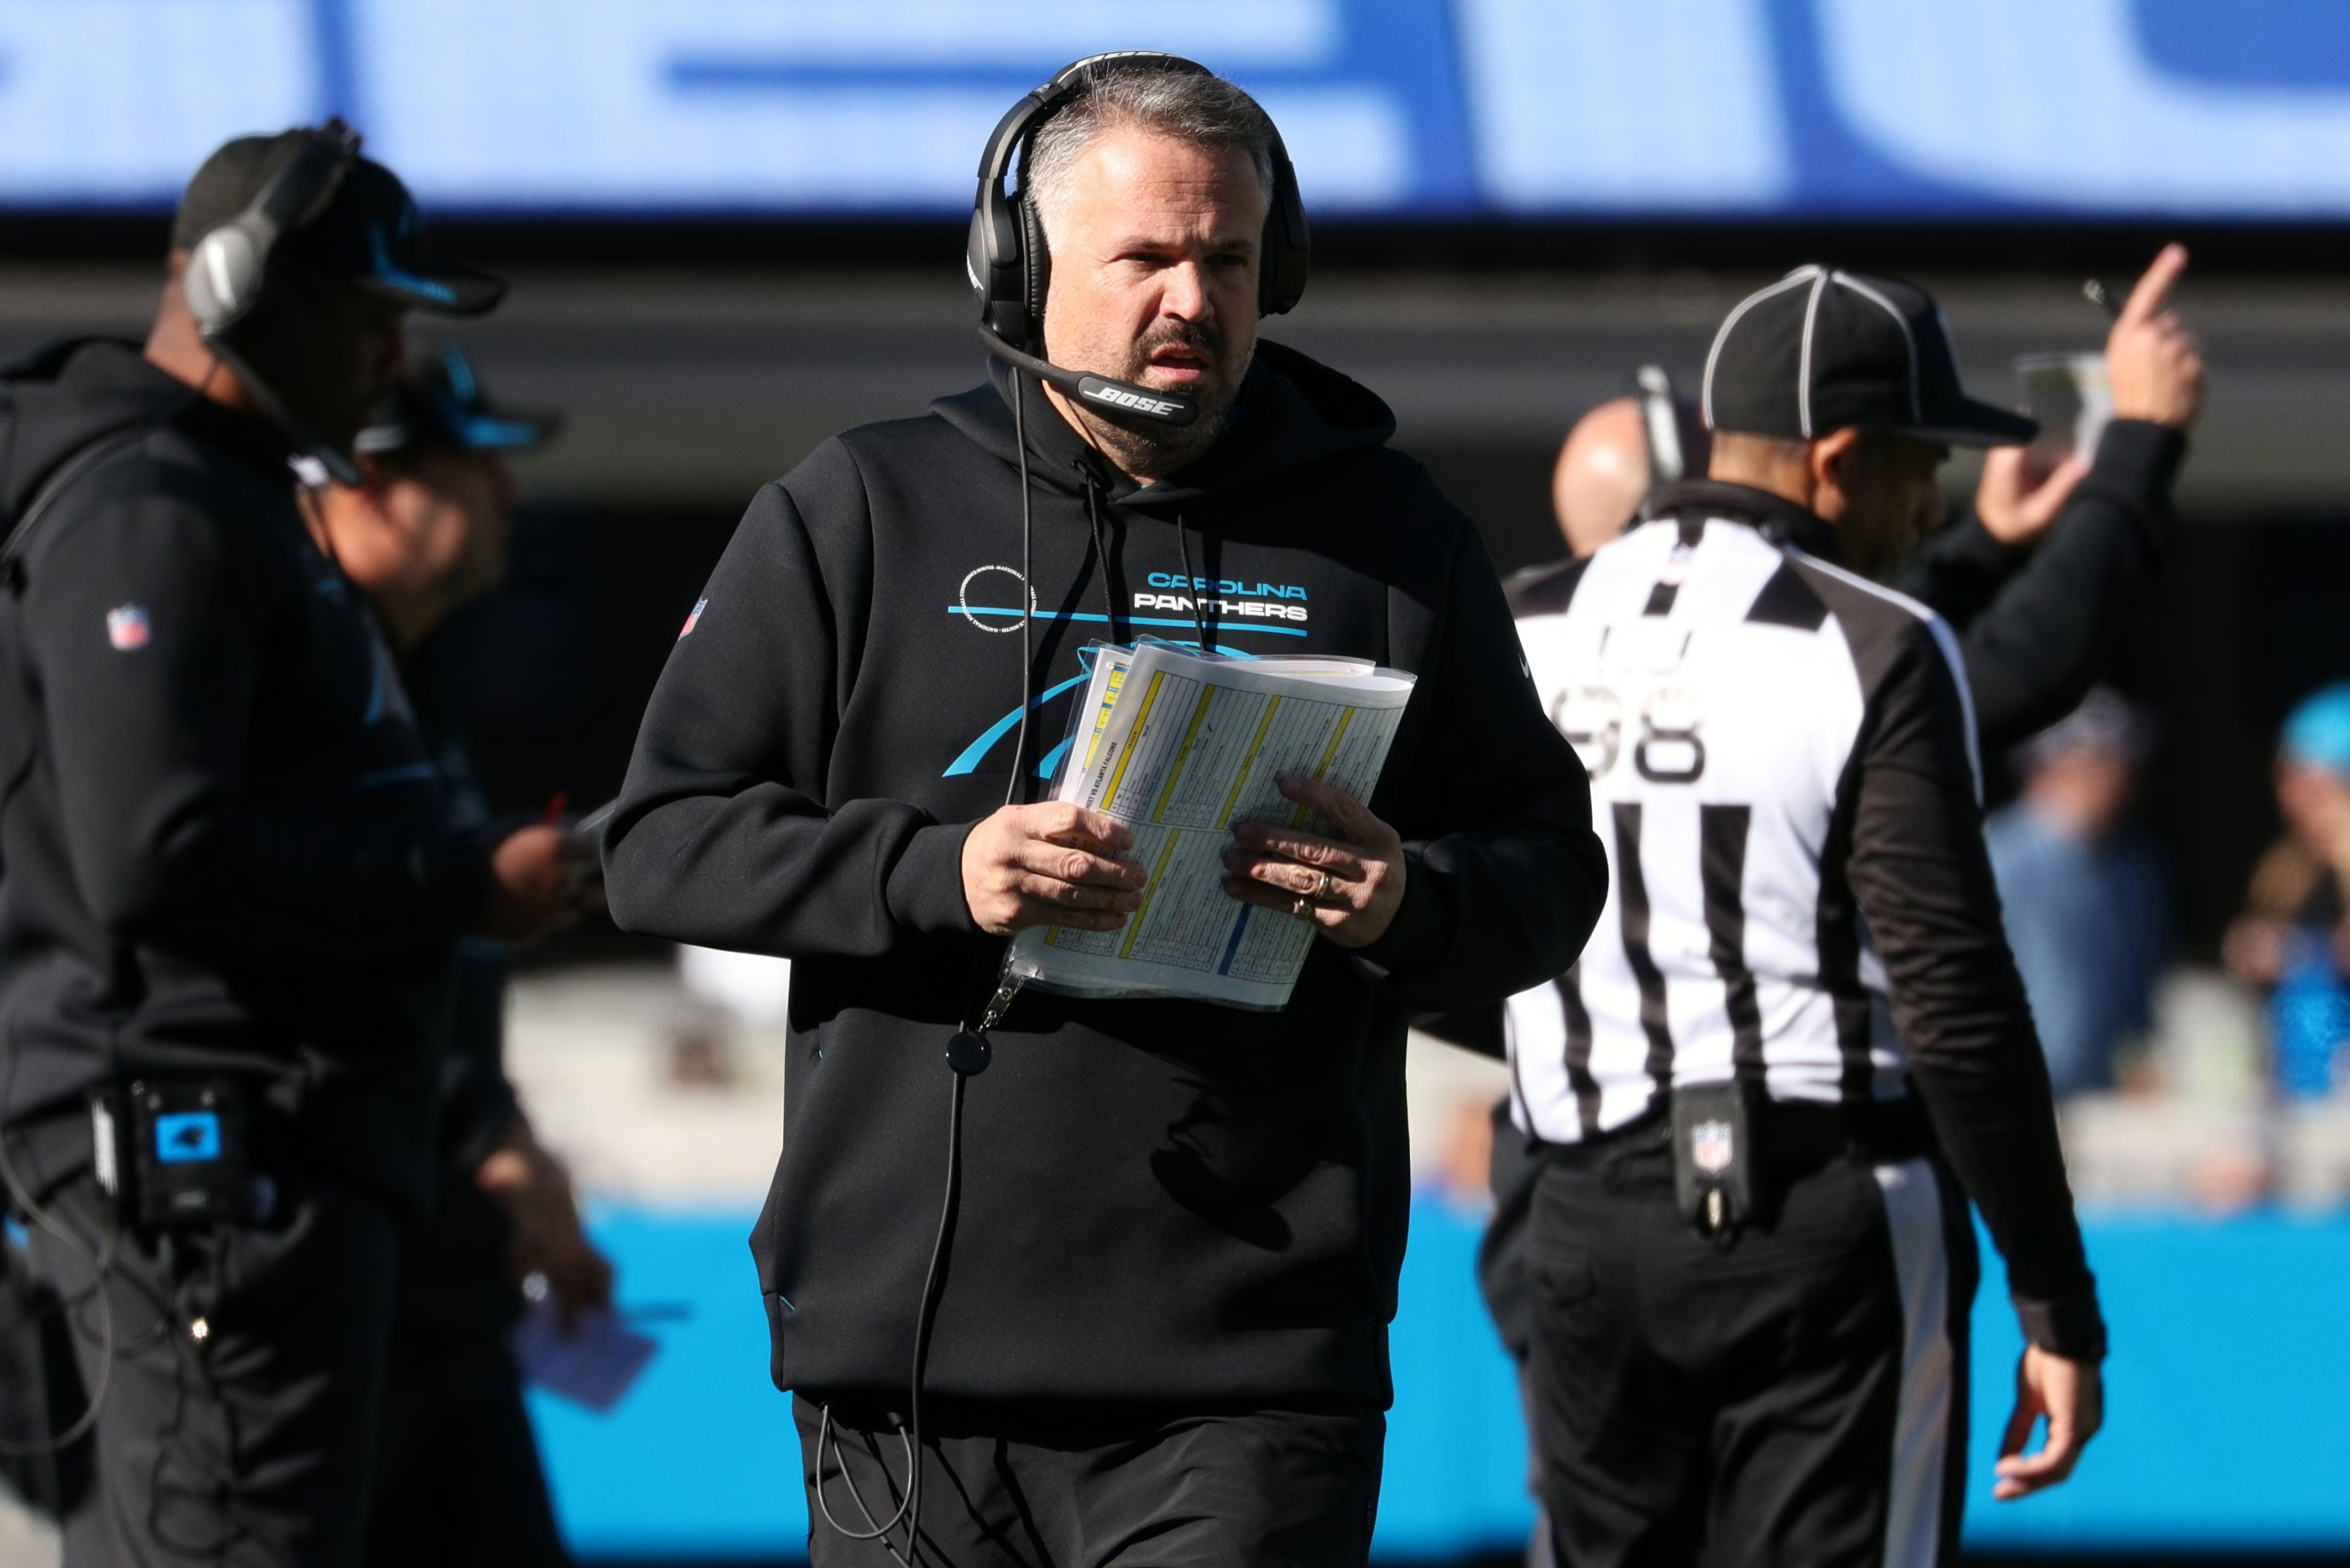 CHARLOTTE, NORTH CAROLINA - DECEMBER 12: Head coach Matt Rhule of the Carolina Panthers looks on during the second quarter of the game against the Atlanta Falcons at Bank of America Stadium on December 12, 2021 in Charlotte, North Carolina. (Photo by Lance King/Getty Images)